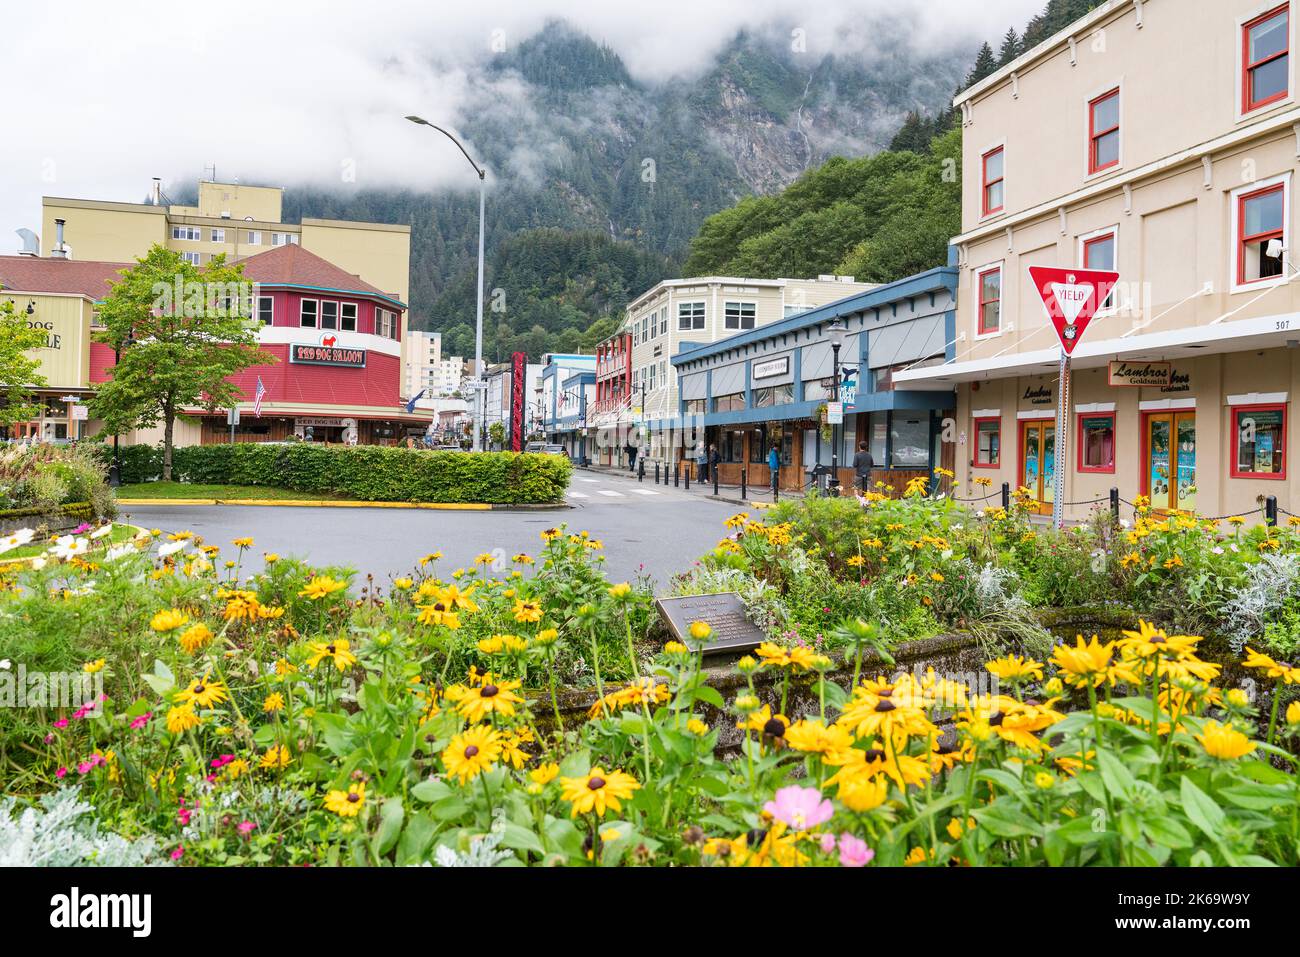 Juneau, Alaska - September 8, 2020: View of Franklin Street looking north in the old city district of Juneau, Alaska Stock Photo